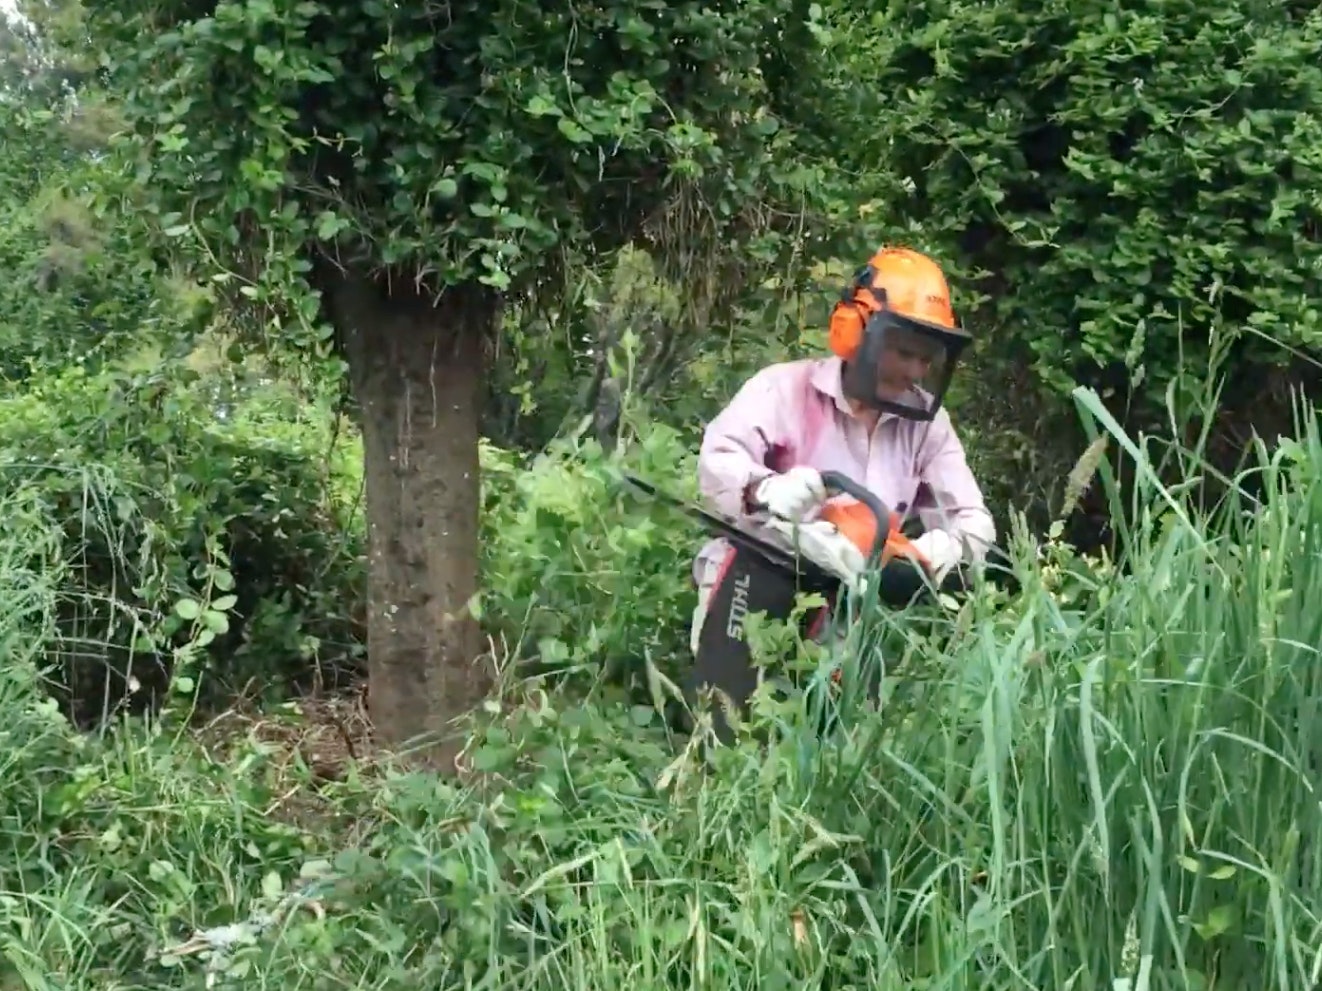 A woman in safety gear chainsawing weeds around the base of a tree